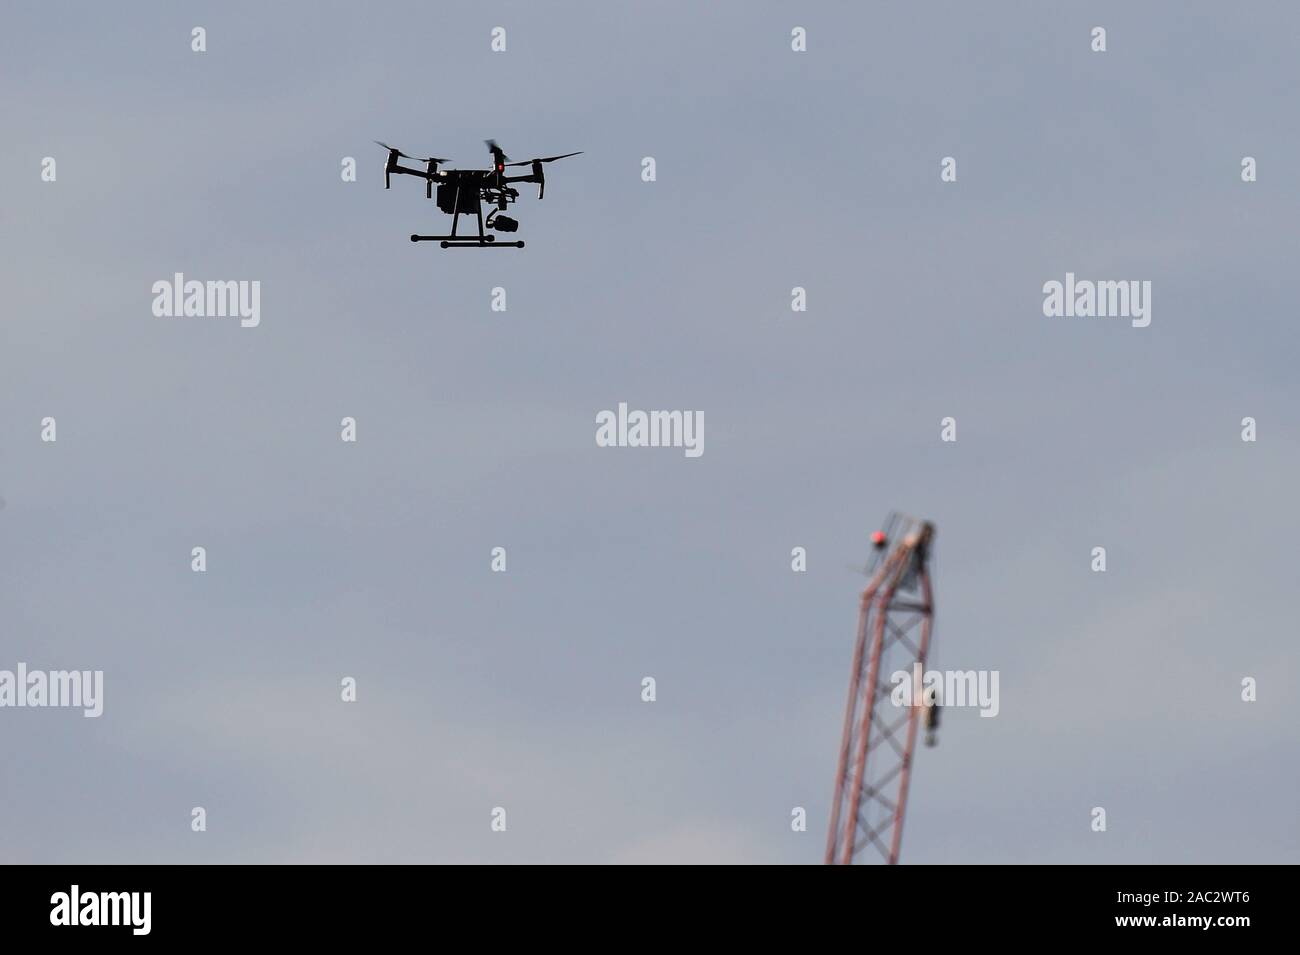 London, UK.  30 November 2019.  A police drone flies above London Bridge. The previous day, a man, now identified by Metropolitan Police as Usman Khan, who had been released from jail after being convicted of terror offences, was shot by police on London Bridge near Fishmongers' Hall after killing a man and a woman.  London Bridge was closed and people ordered to evacuate abandon their vehicles on the bridge.  Credit: Stephen Chung / Alamy Live News Stock Photo